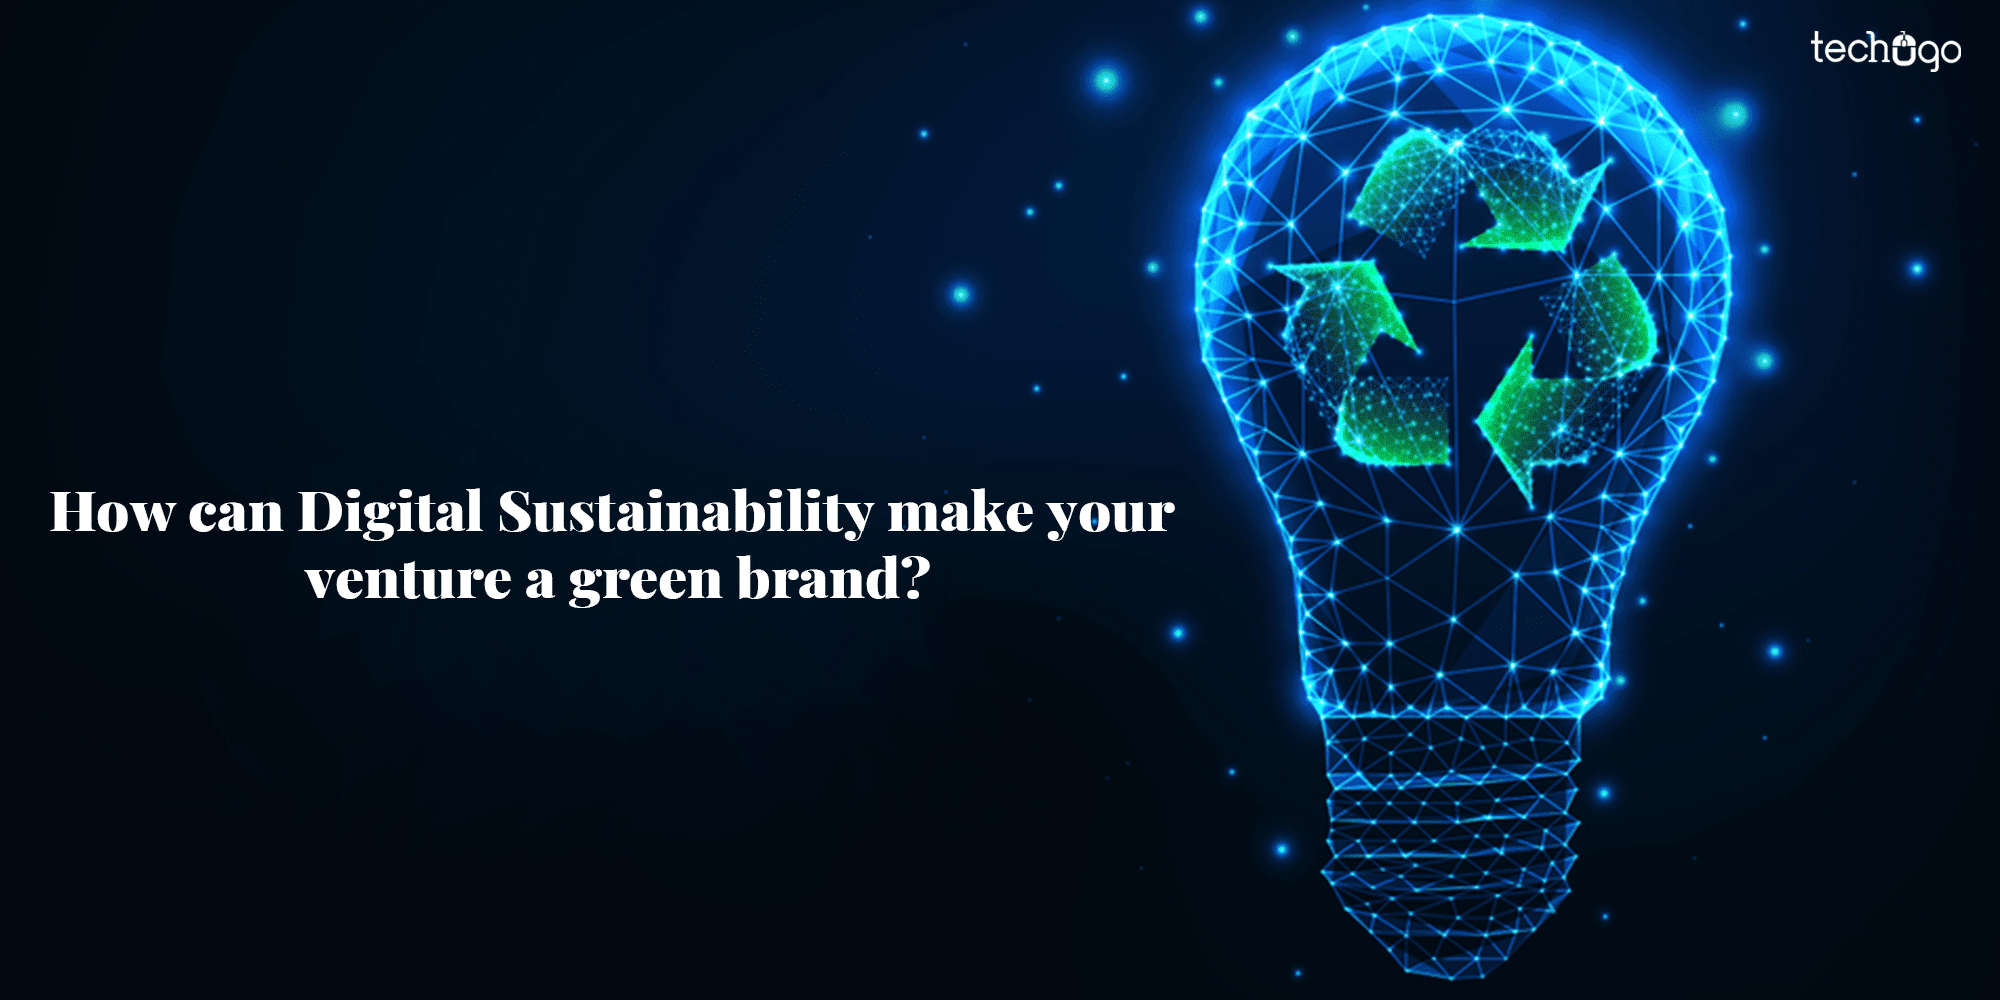 How Can Digital Sustainability Make Your Venture a Green Brand?